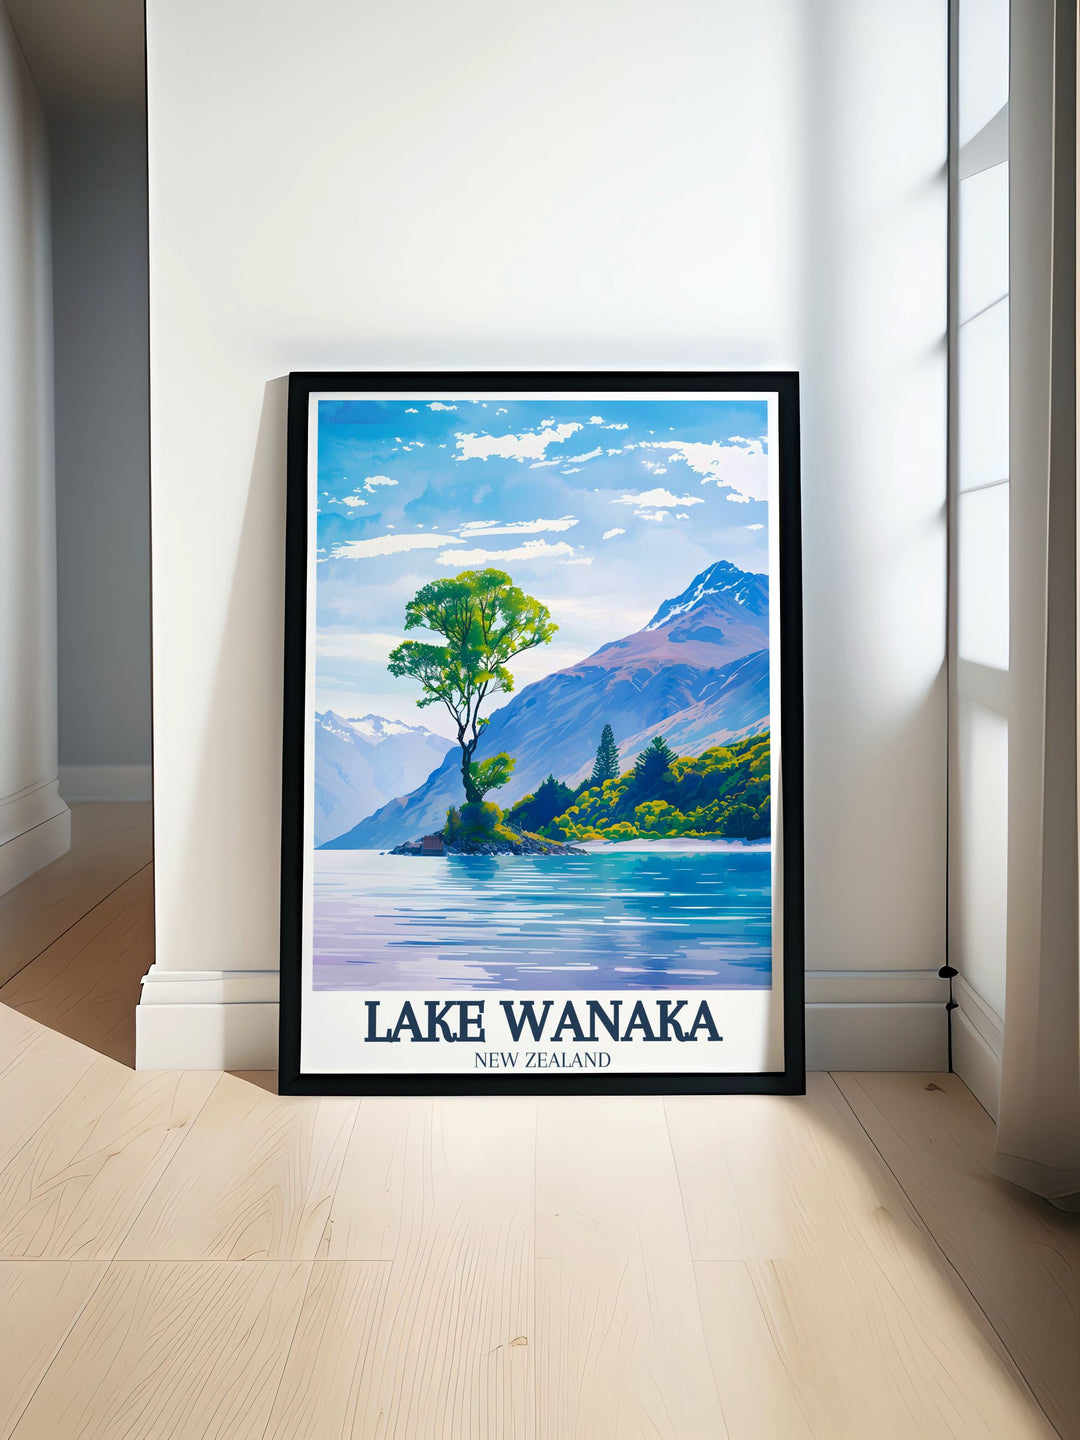 Stunning New Zealand print featuring the iconic lake wanaka tree in Mount Aspiring National Park Perfect wall art for nature lovers and travel enthusiasts who appreciate the serene beauty of Lake Wanaka and want to bring it into their home decor